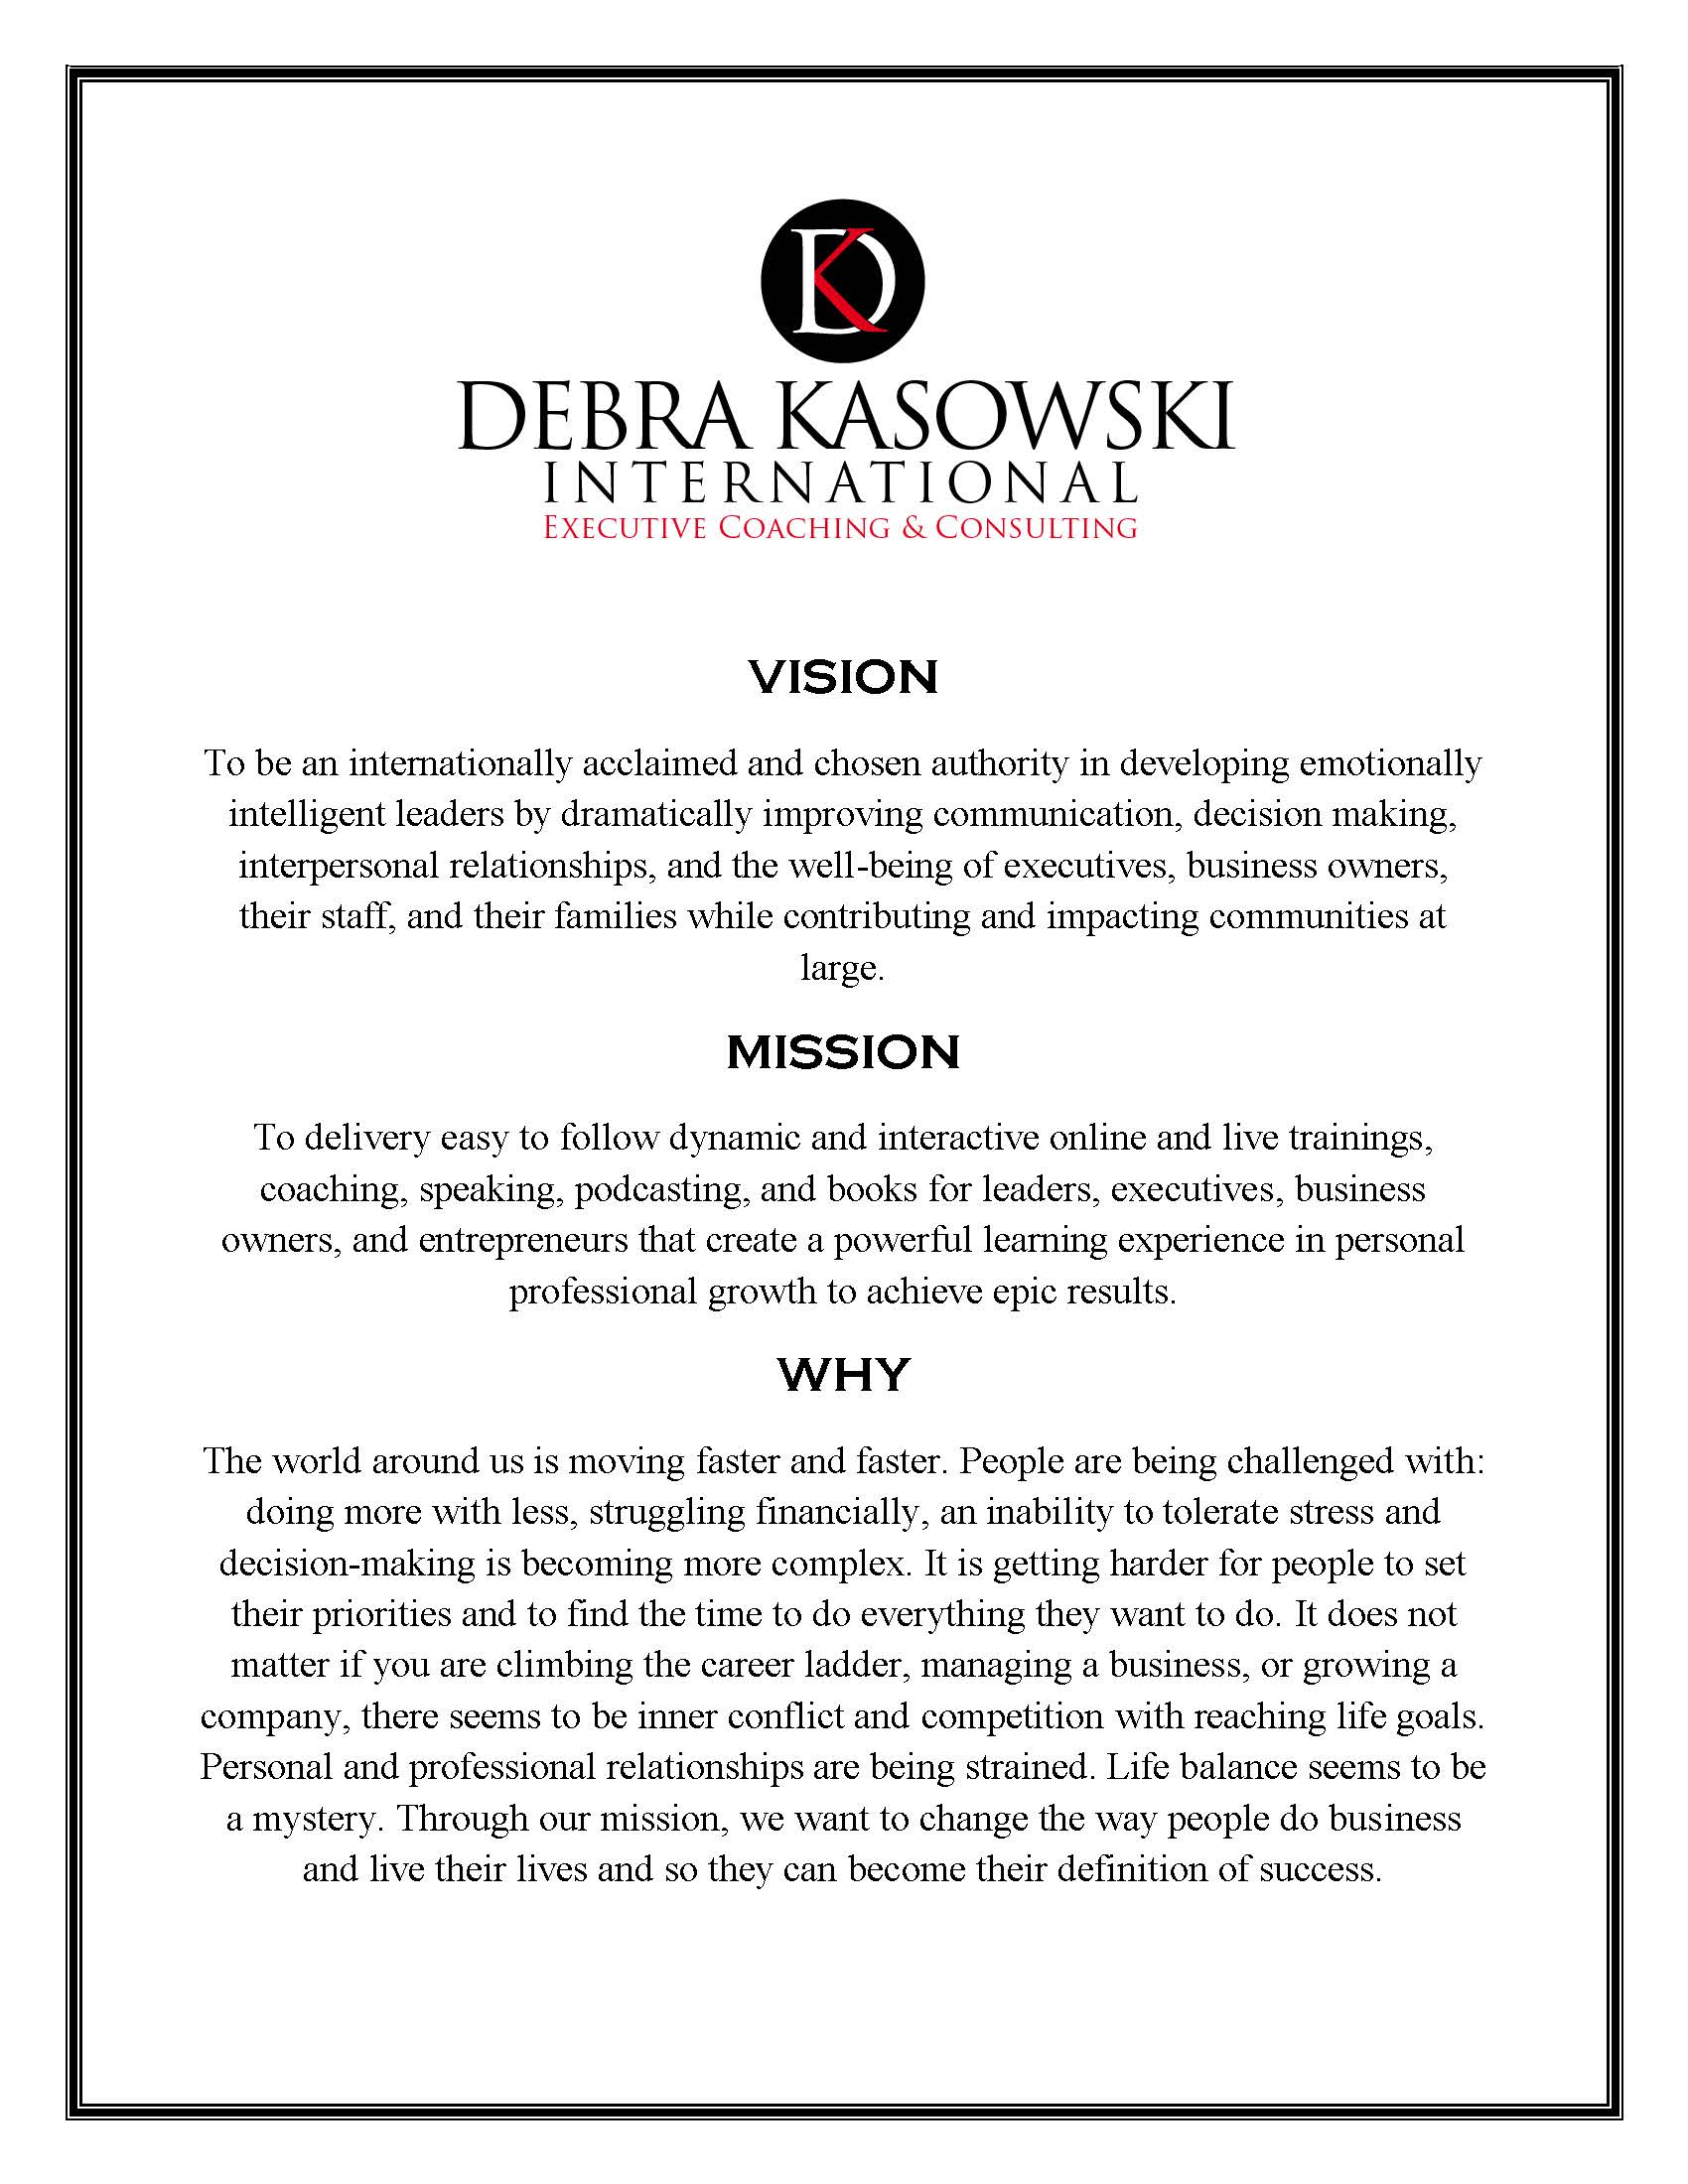 DKI VisionMissionWhyCoreValues_Page_1